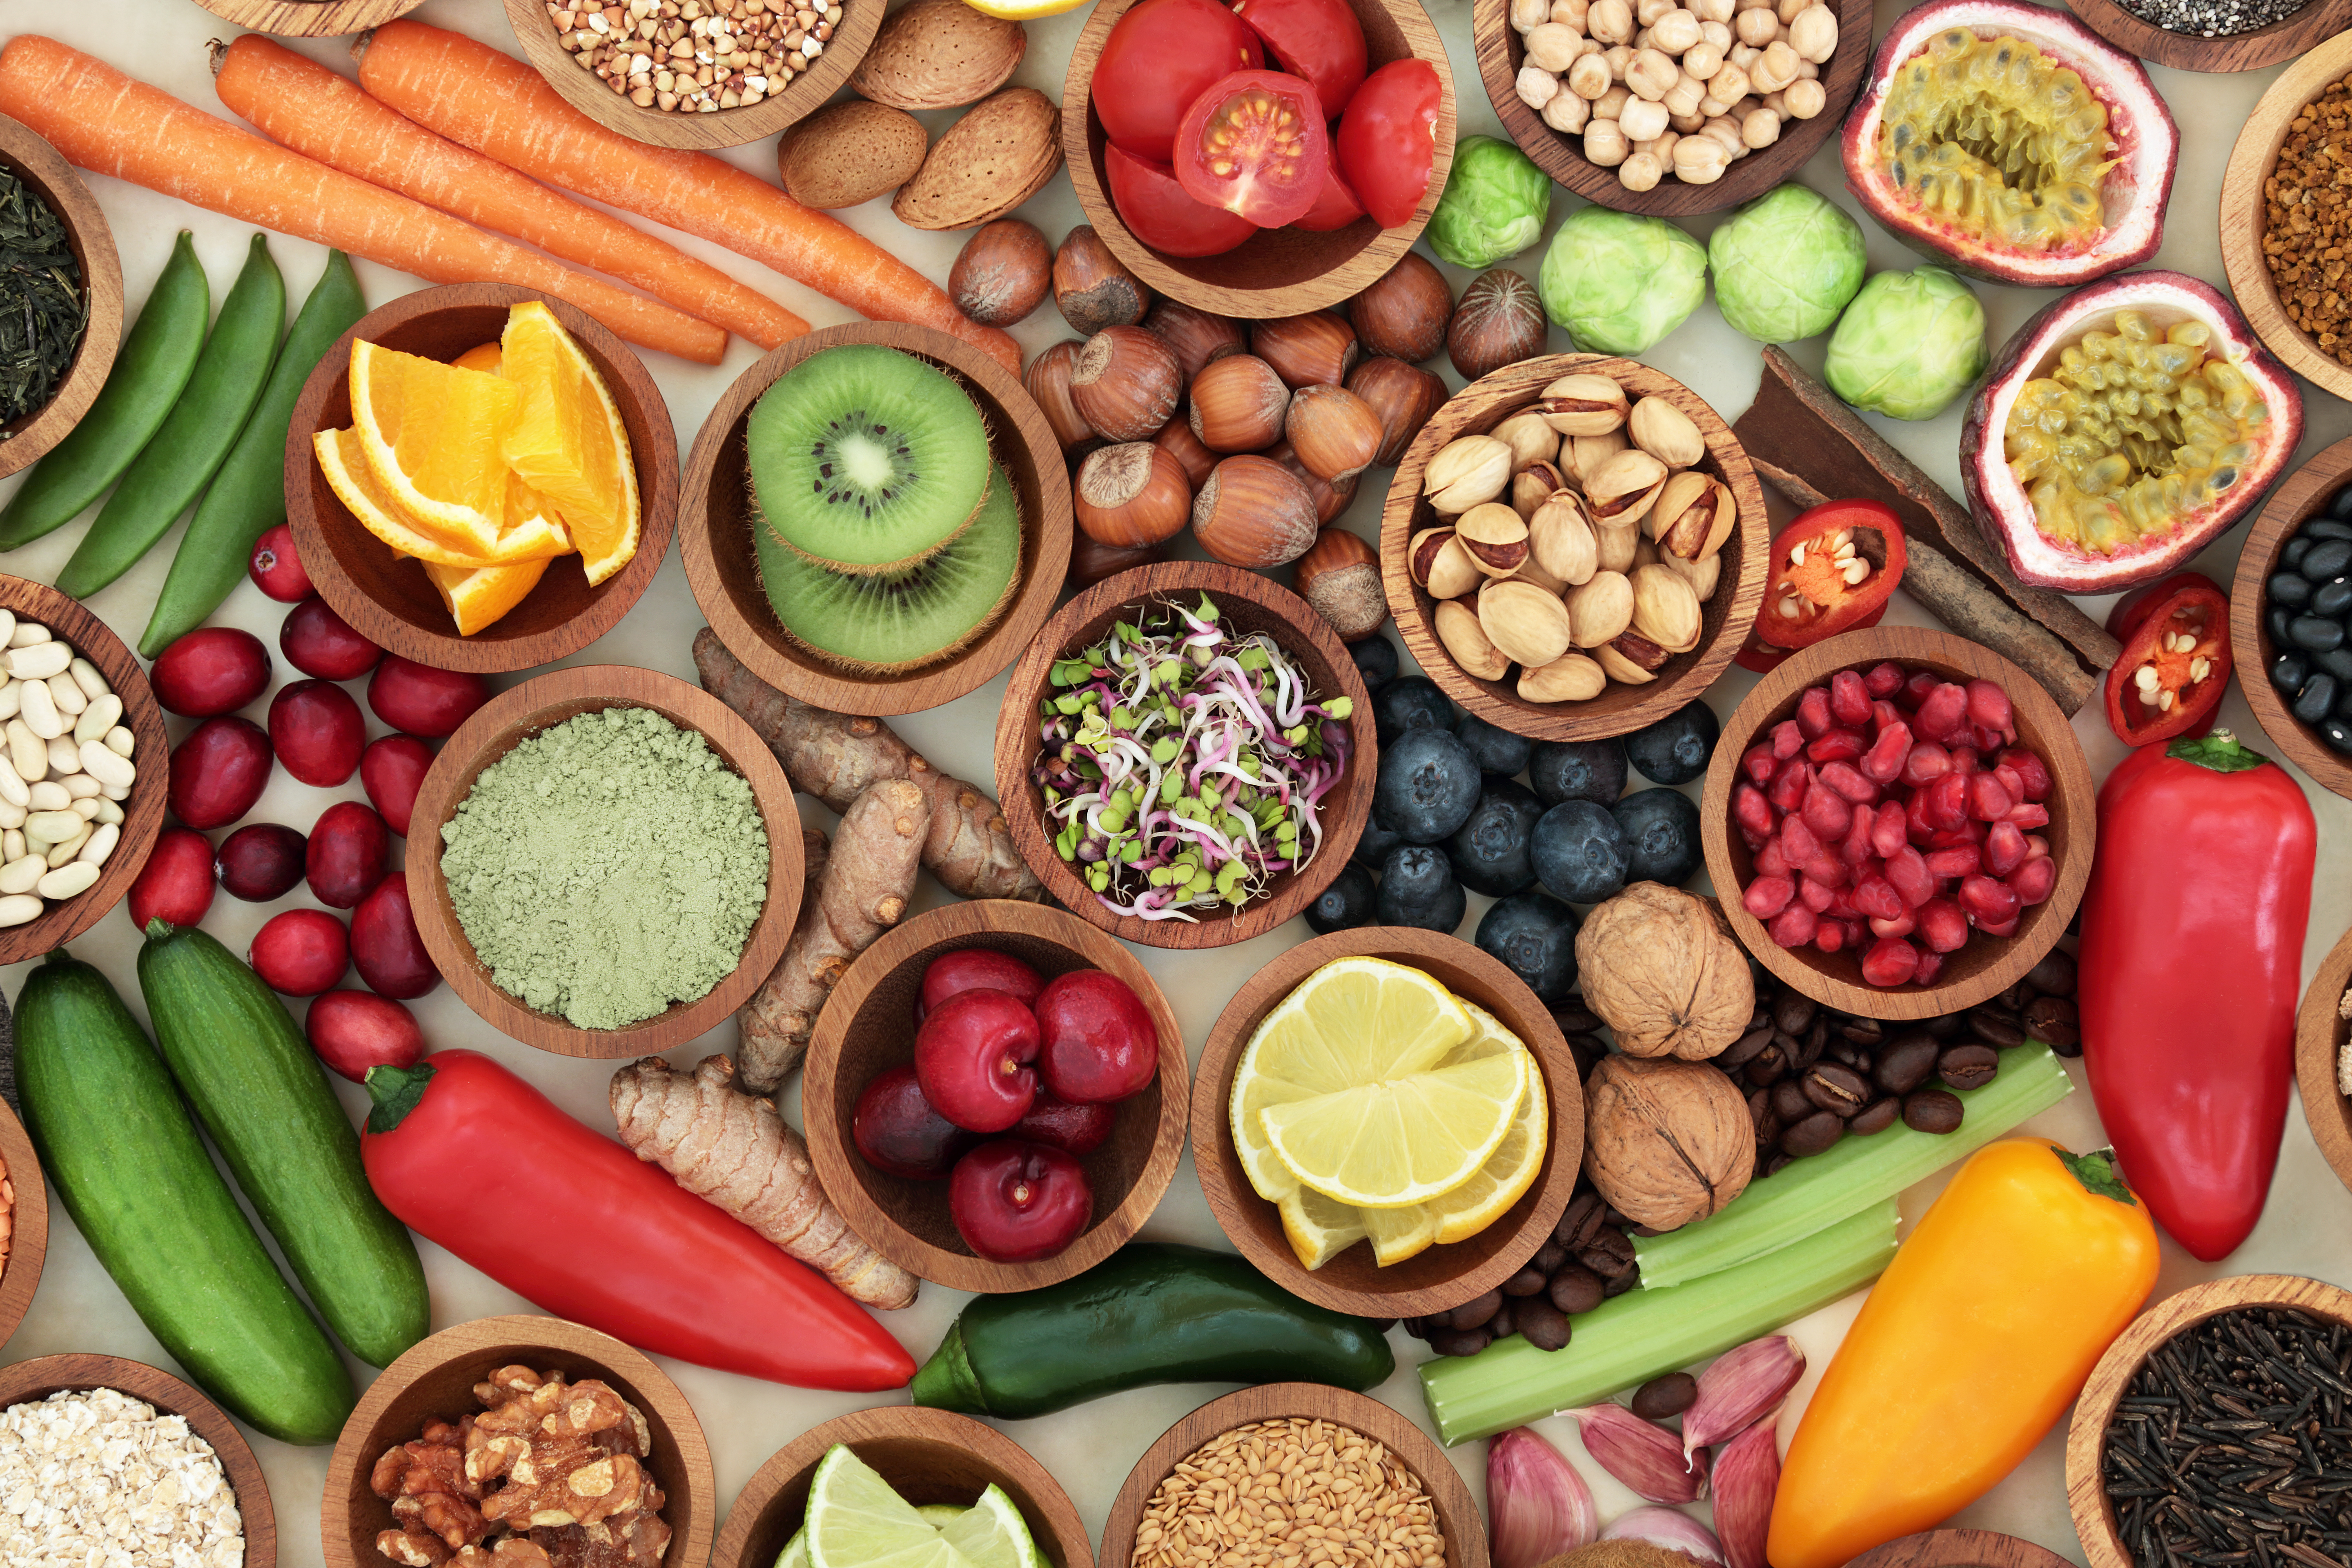 Top Consumer Food Trends in 2023: Sustainability, Self-Care, and Spice